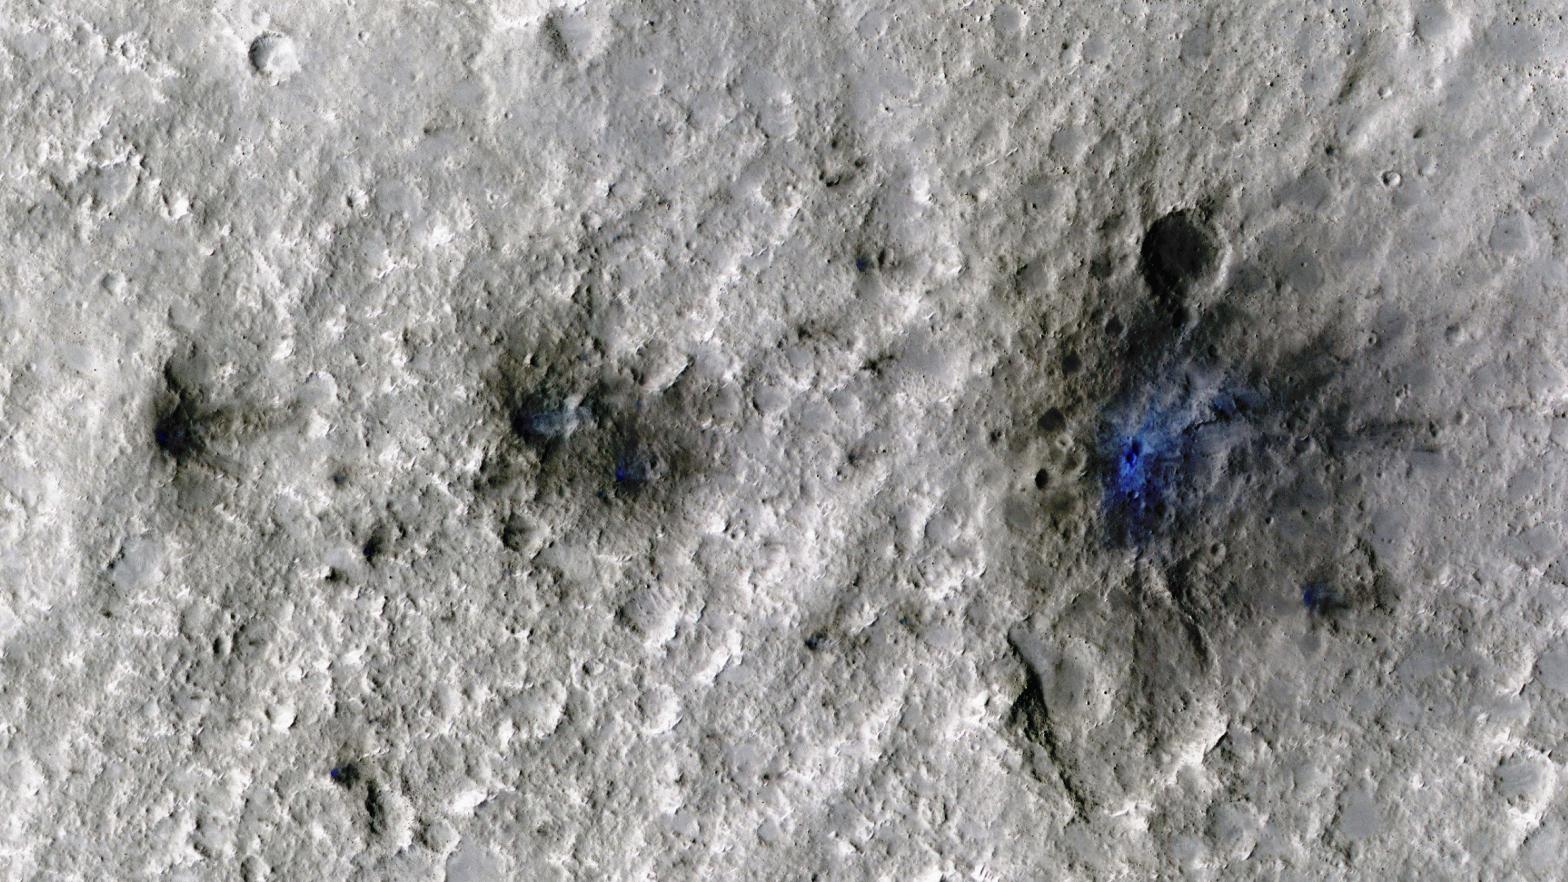 The meteoroid exploded into three pieces upon entering the atmosphere, leaving behind at least three craters, seen here highlighted in blue. (Image: NASA/JPL-Caltech/University of Arizona)